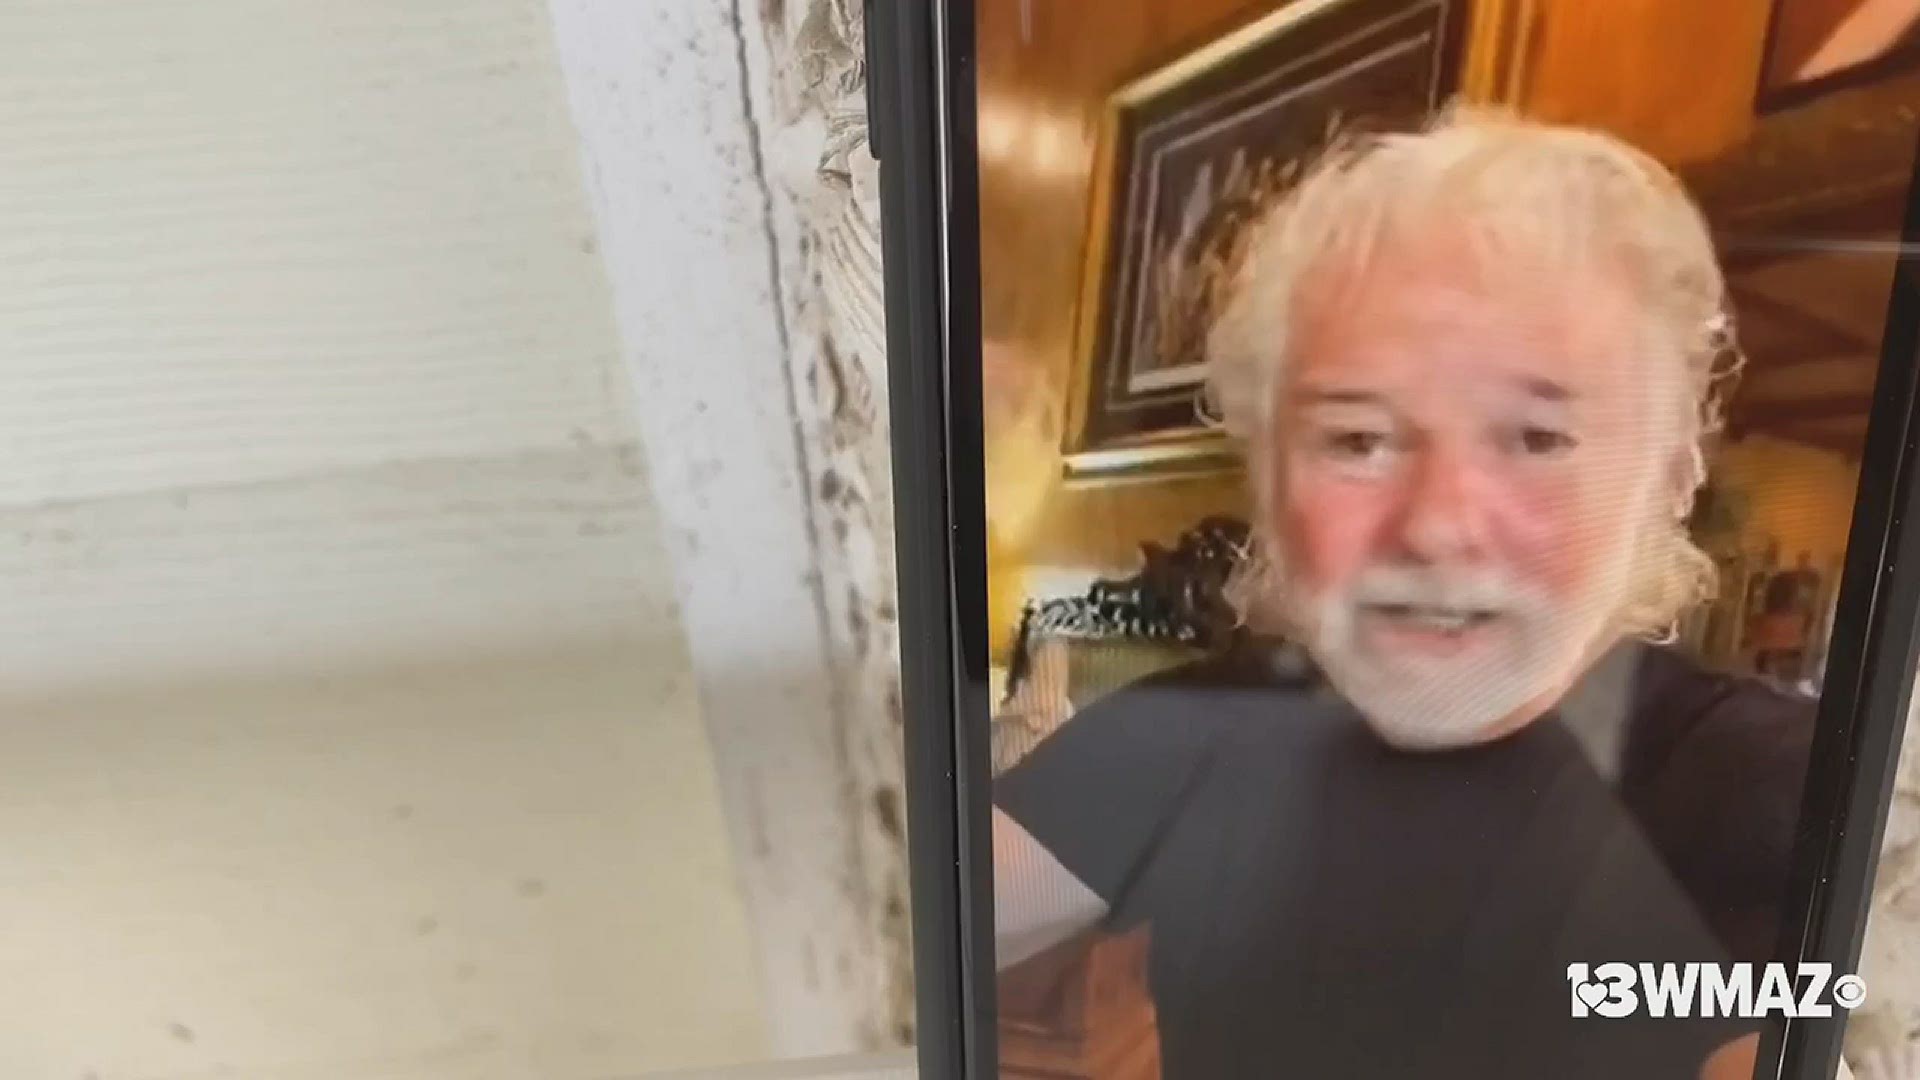 Rolling Stones keyboardist and former Allman Brothers Band member Chuck Leavell sat down to talk to Meteorologist Ben Jones about Little Richard and his legacy.